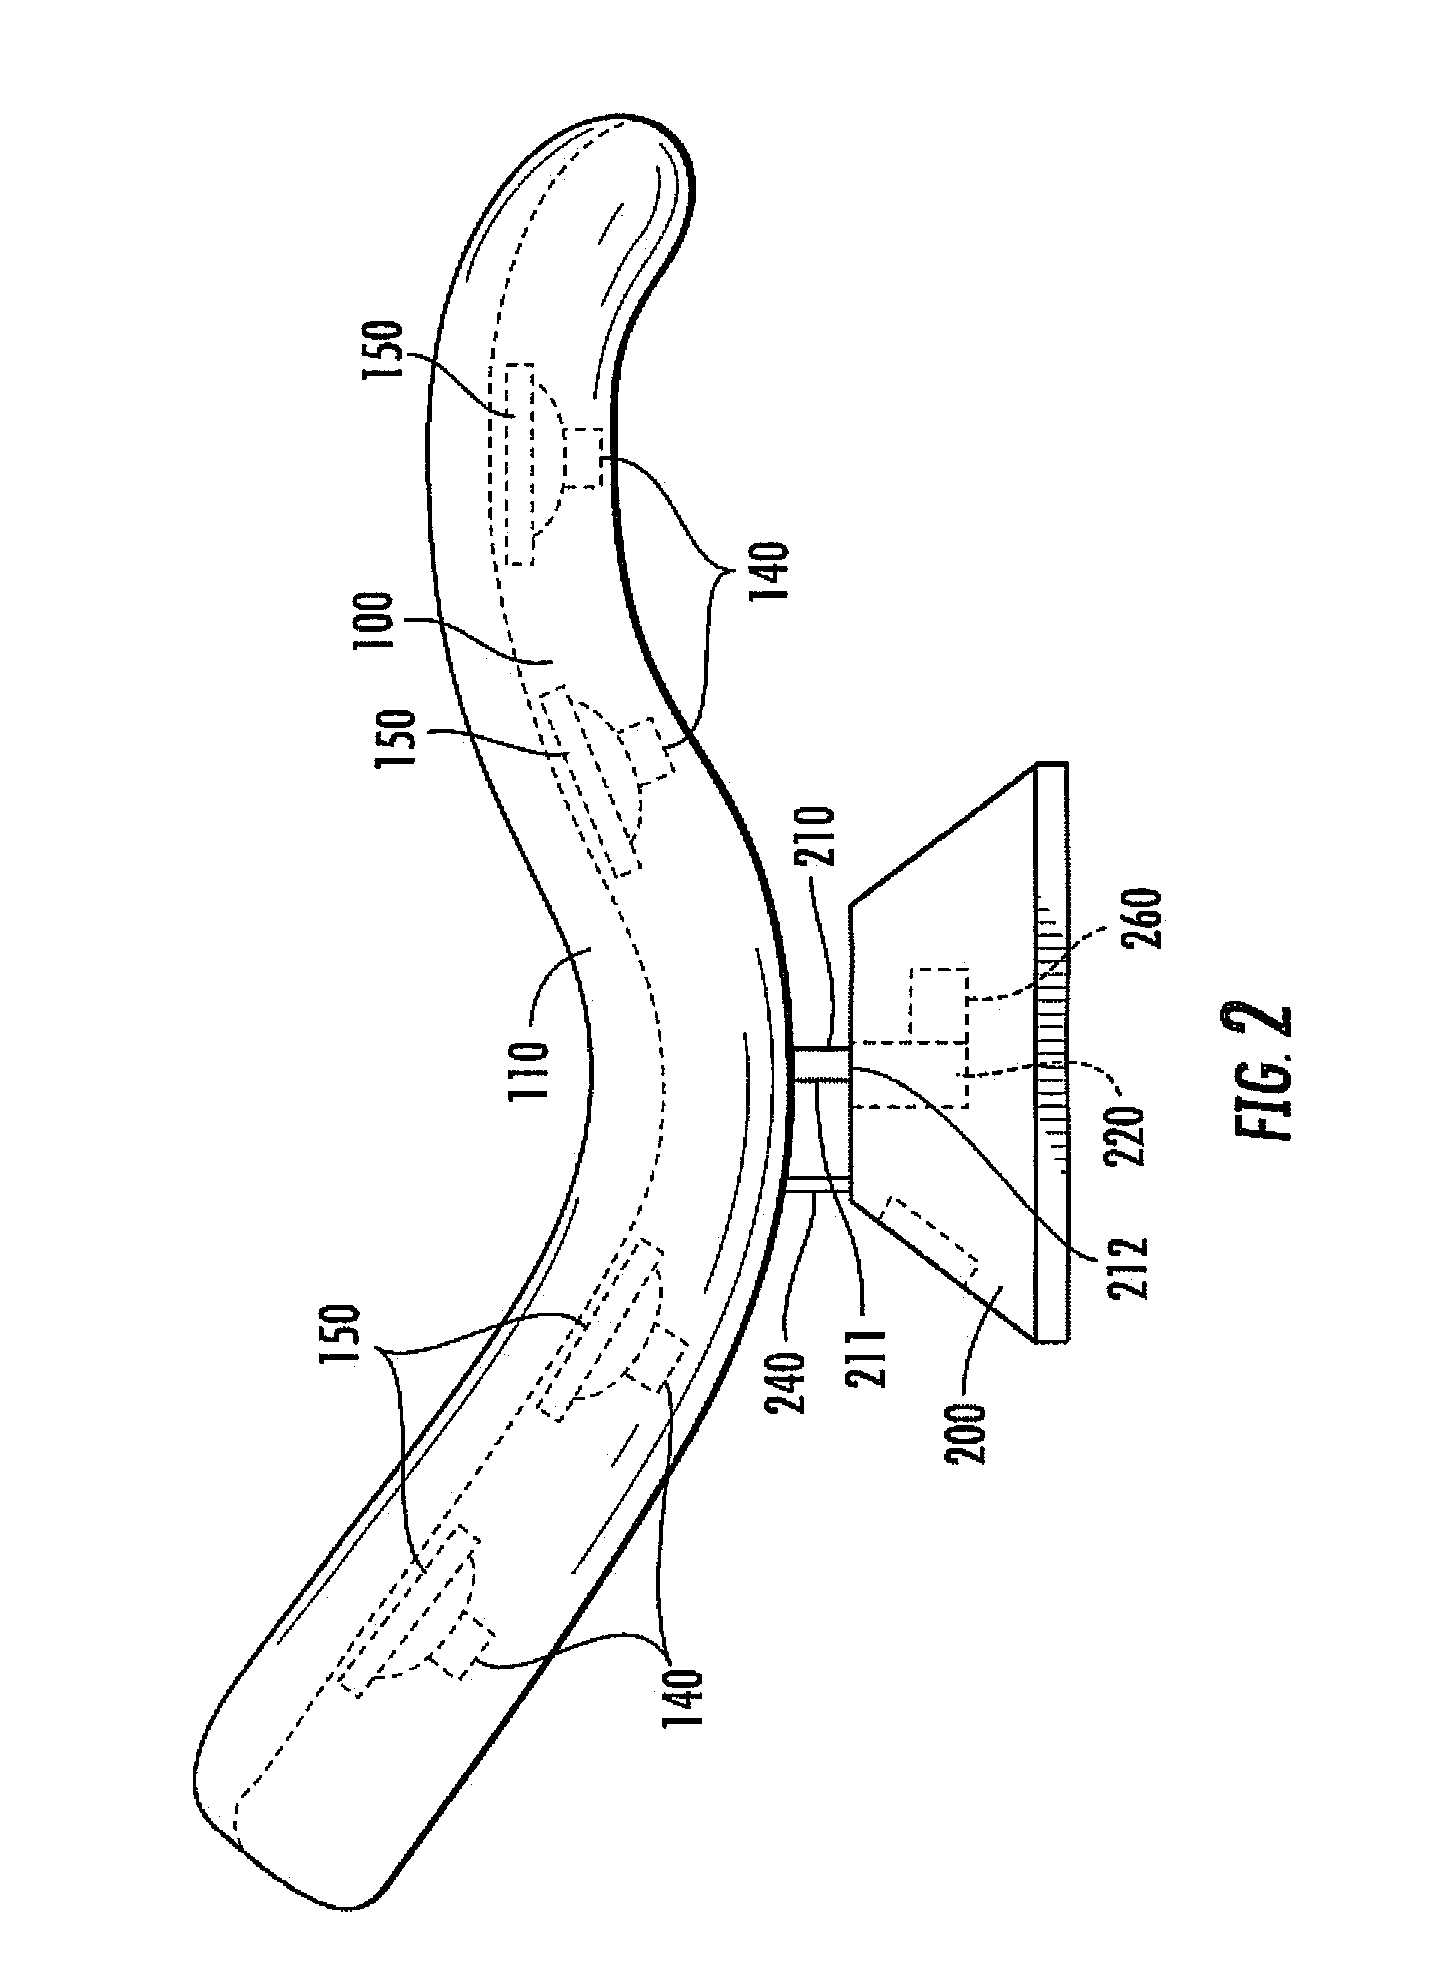 Induced Relaxation and Therapeutic Apparatus and Method